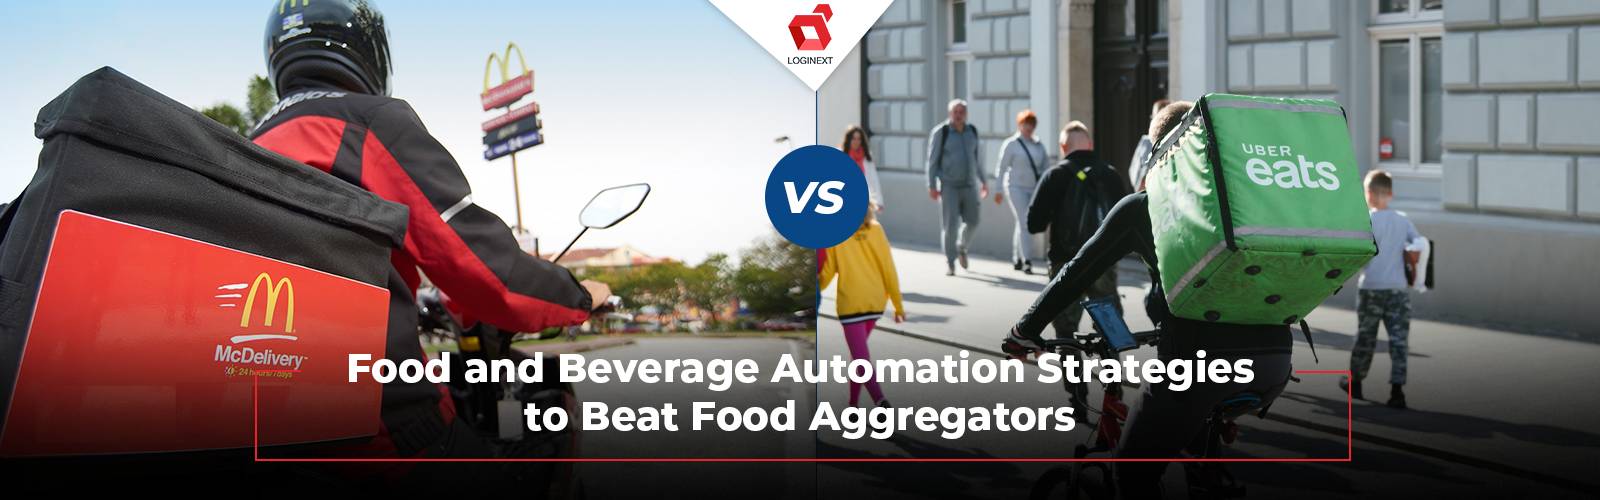 Food and Beverage Automation Strategies to beat Food Aggregators